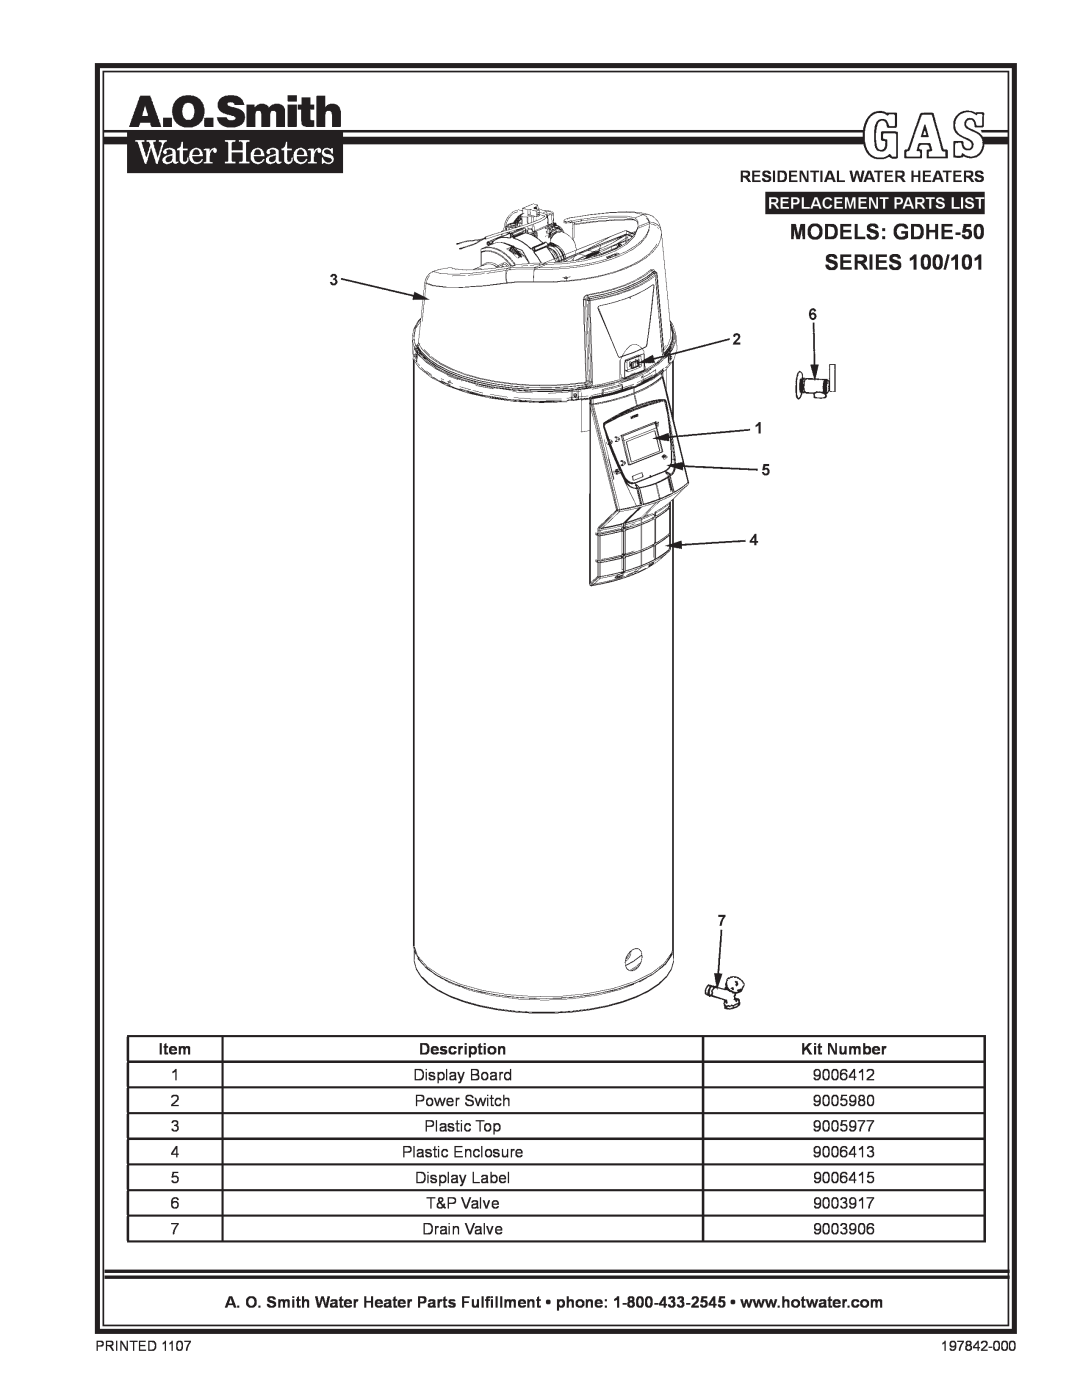 A.O. Smith manual MODELS GDHE-50 SERIES 100/101, Residential Water Heaters, Description, Kit Number, T&P Valve 